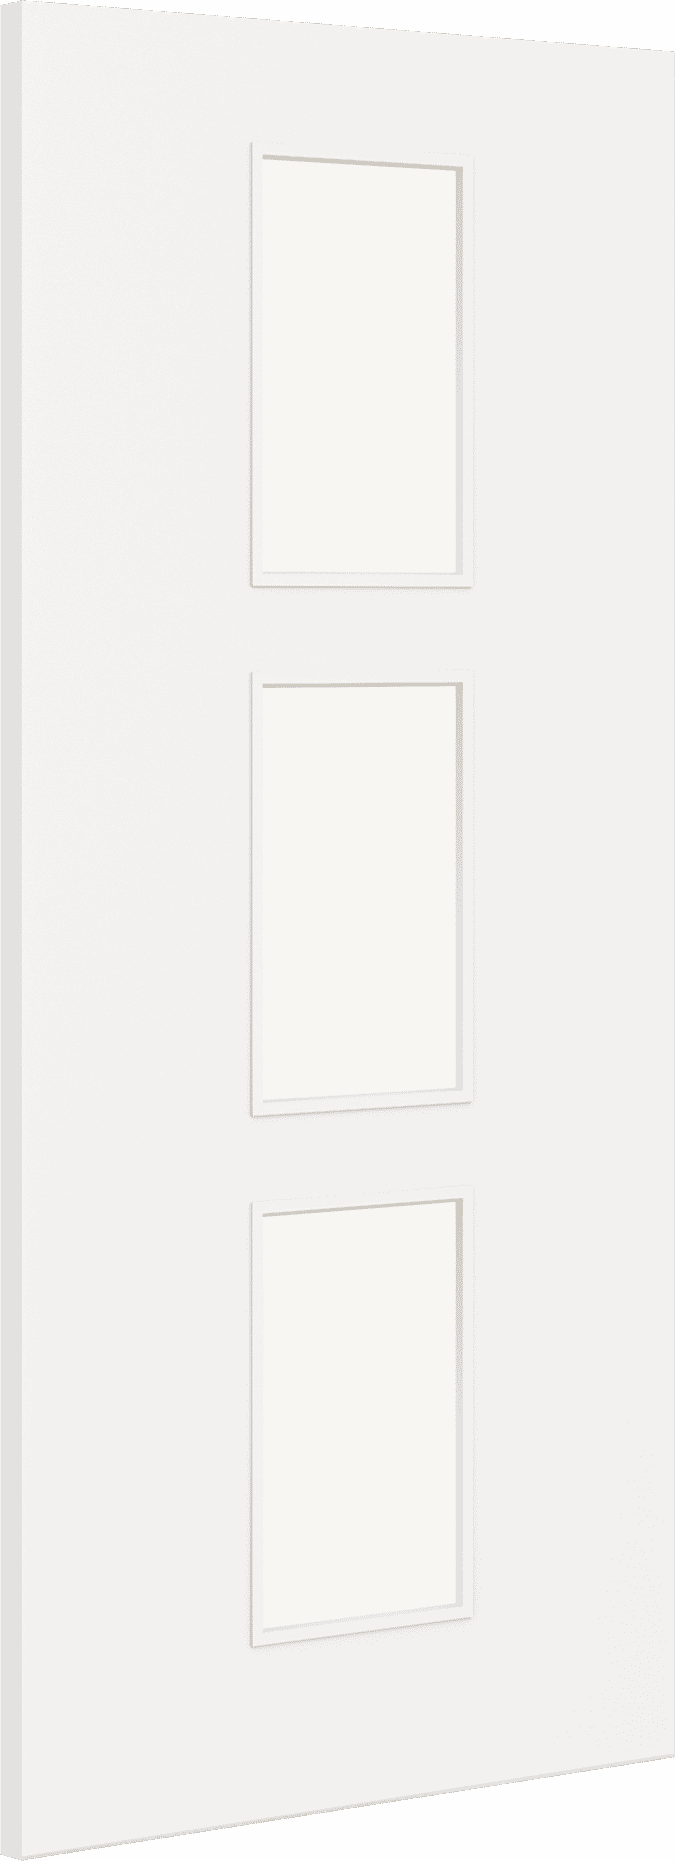 1981mm x 610mm x 44mm (24") Architectural Paint Grade White 11 Frosted Glazed Fire Door Blank